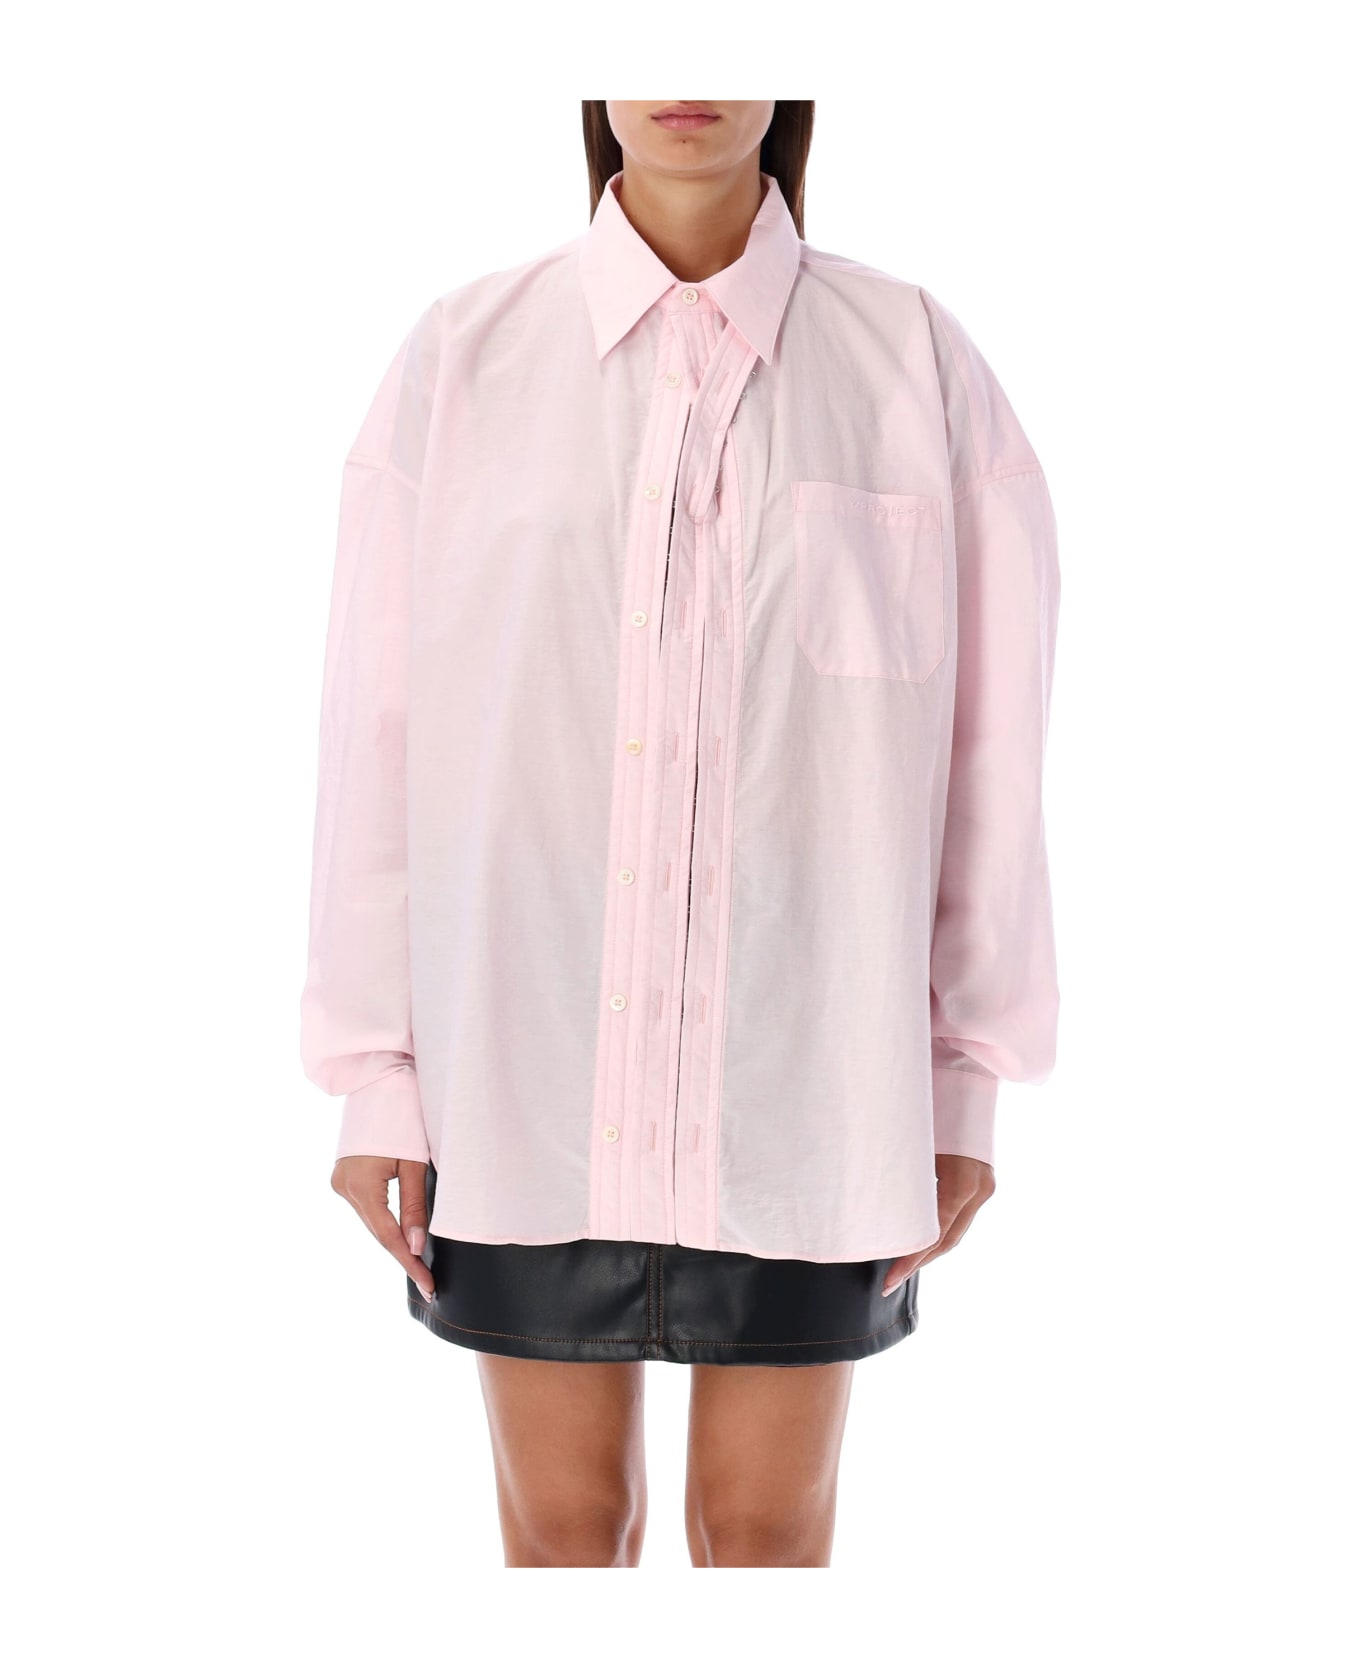 Y/Project Hook And Eye Shirt - LIGHT PINK